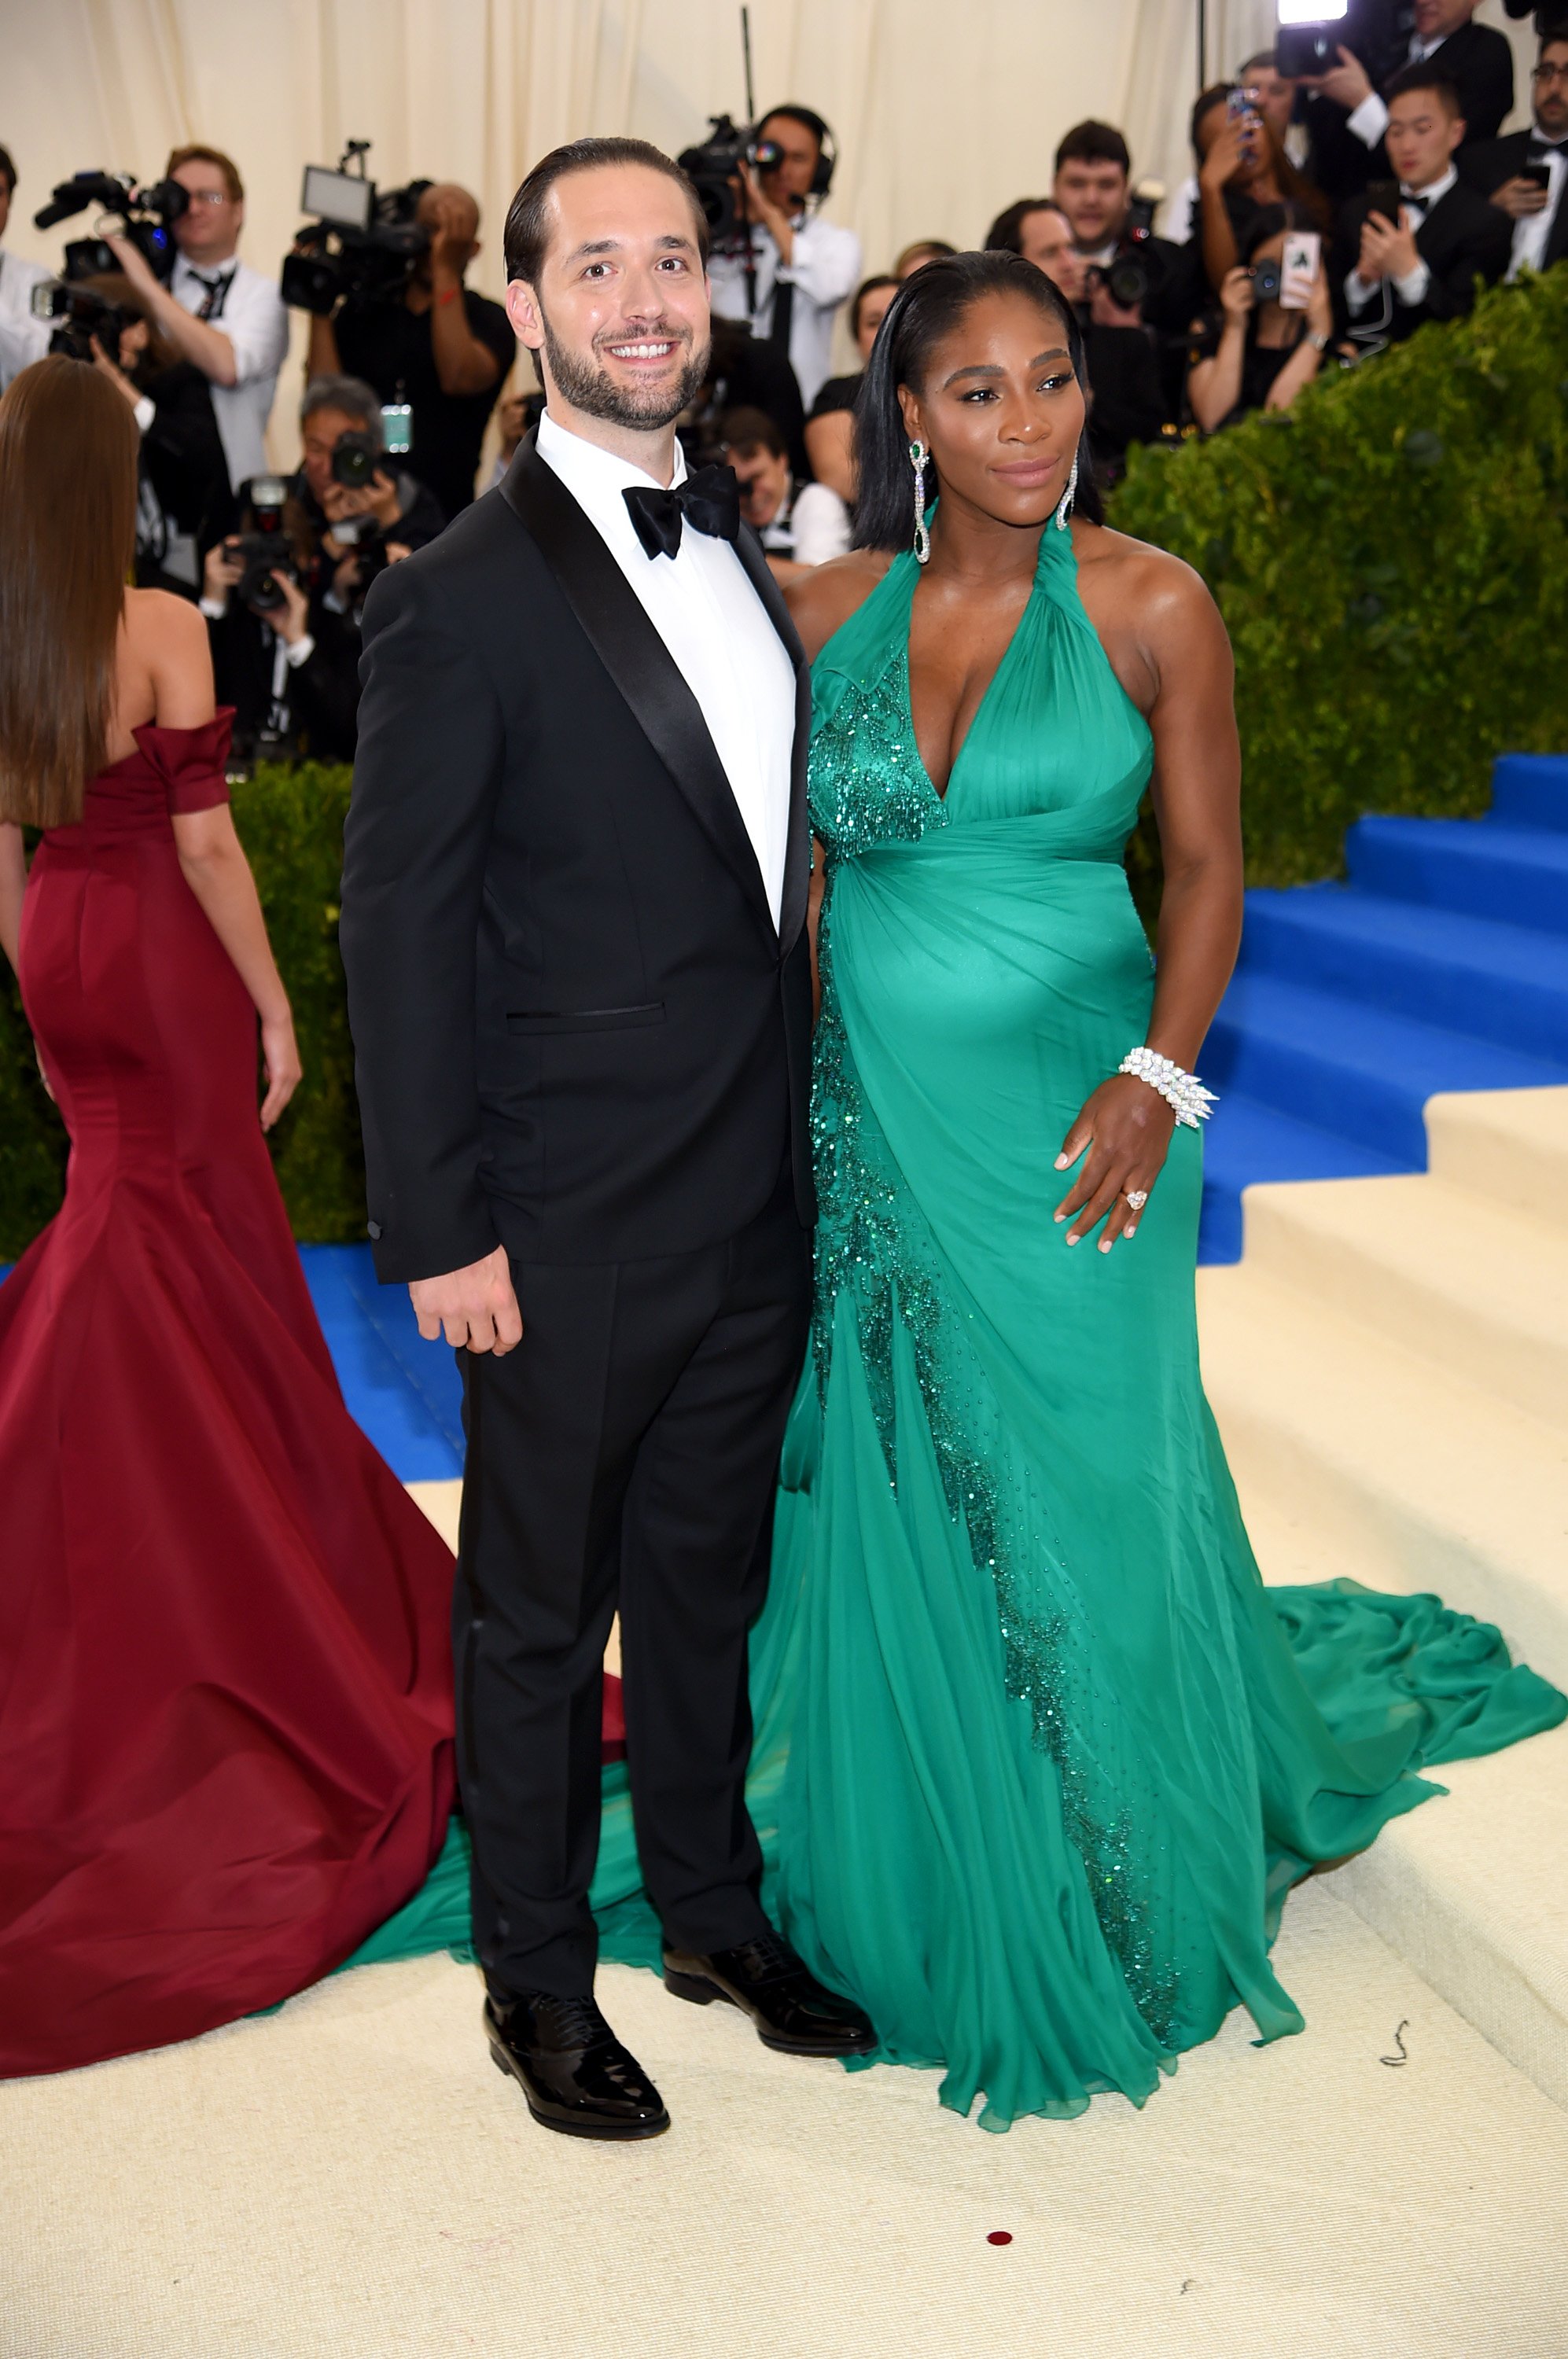 Alexis Ohanian and Serena Williams pictured at  the "Rei Kawakubo/Comme des Garcons: Art Of The In-Between" Costume Institute Gala at Metropolitan Museum of Art, 2017, New York City. | Photo: Getty Images